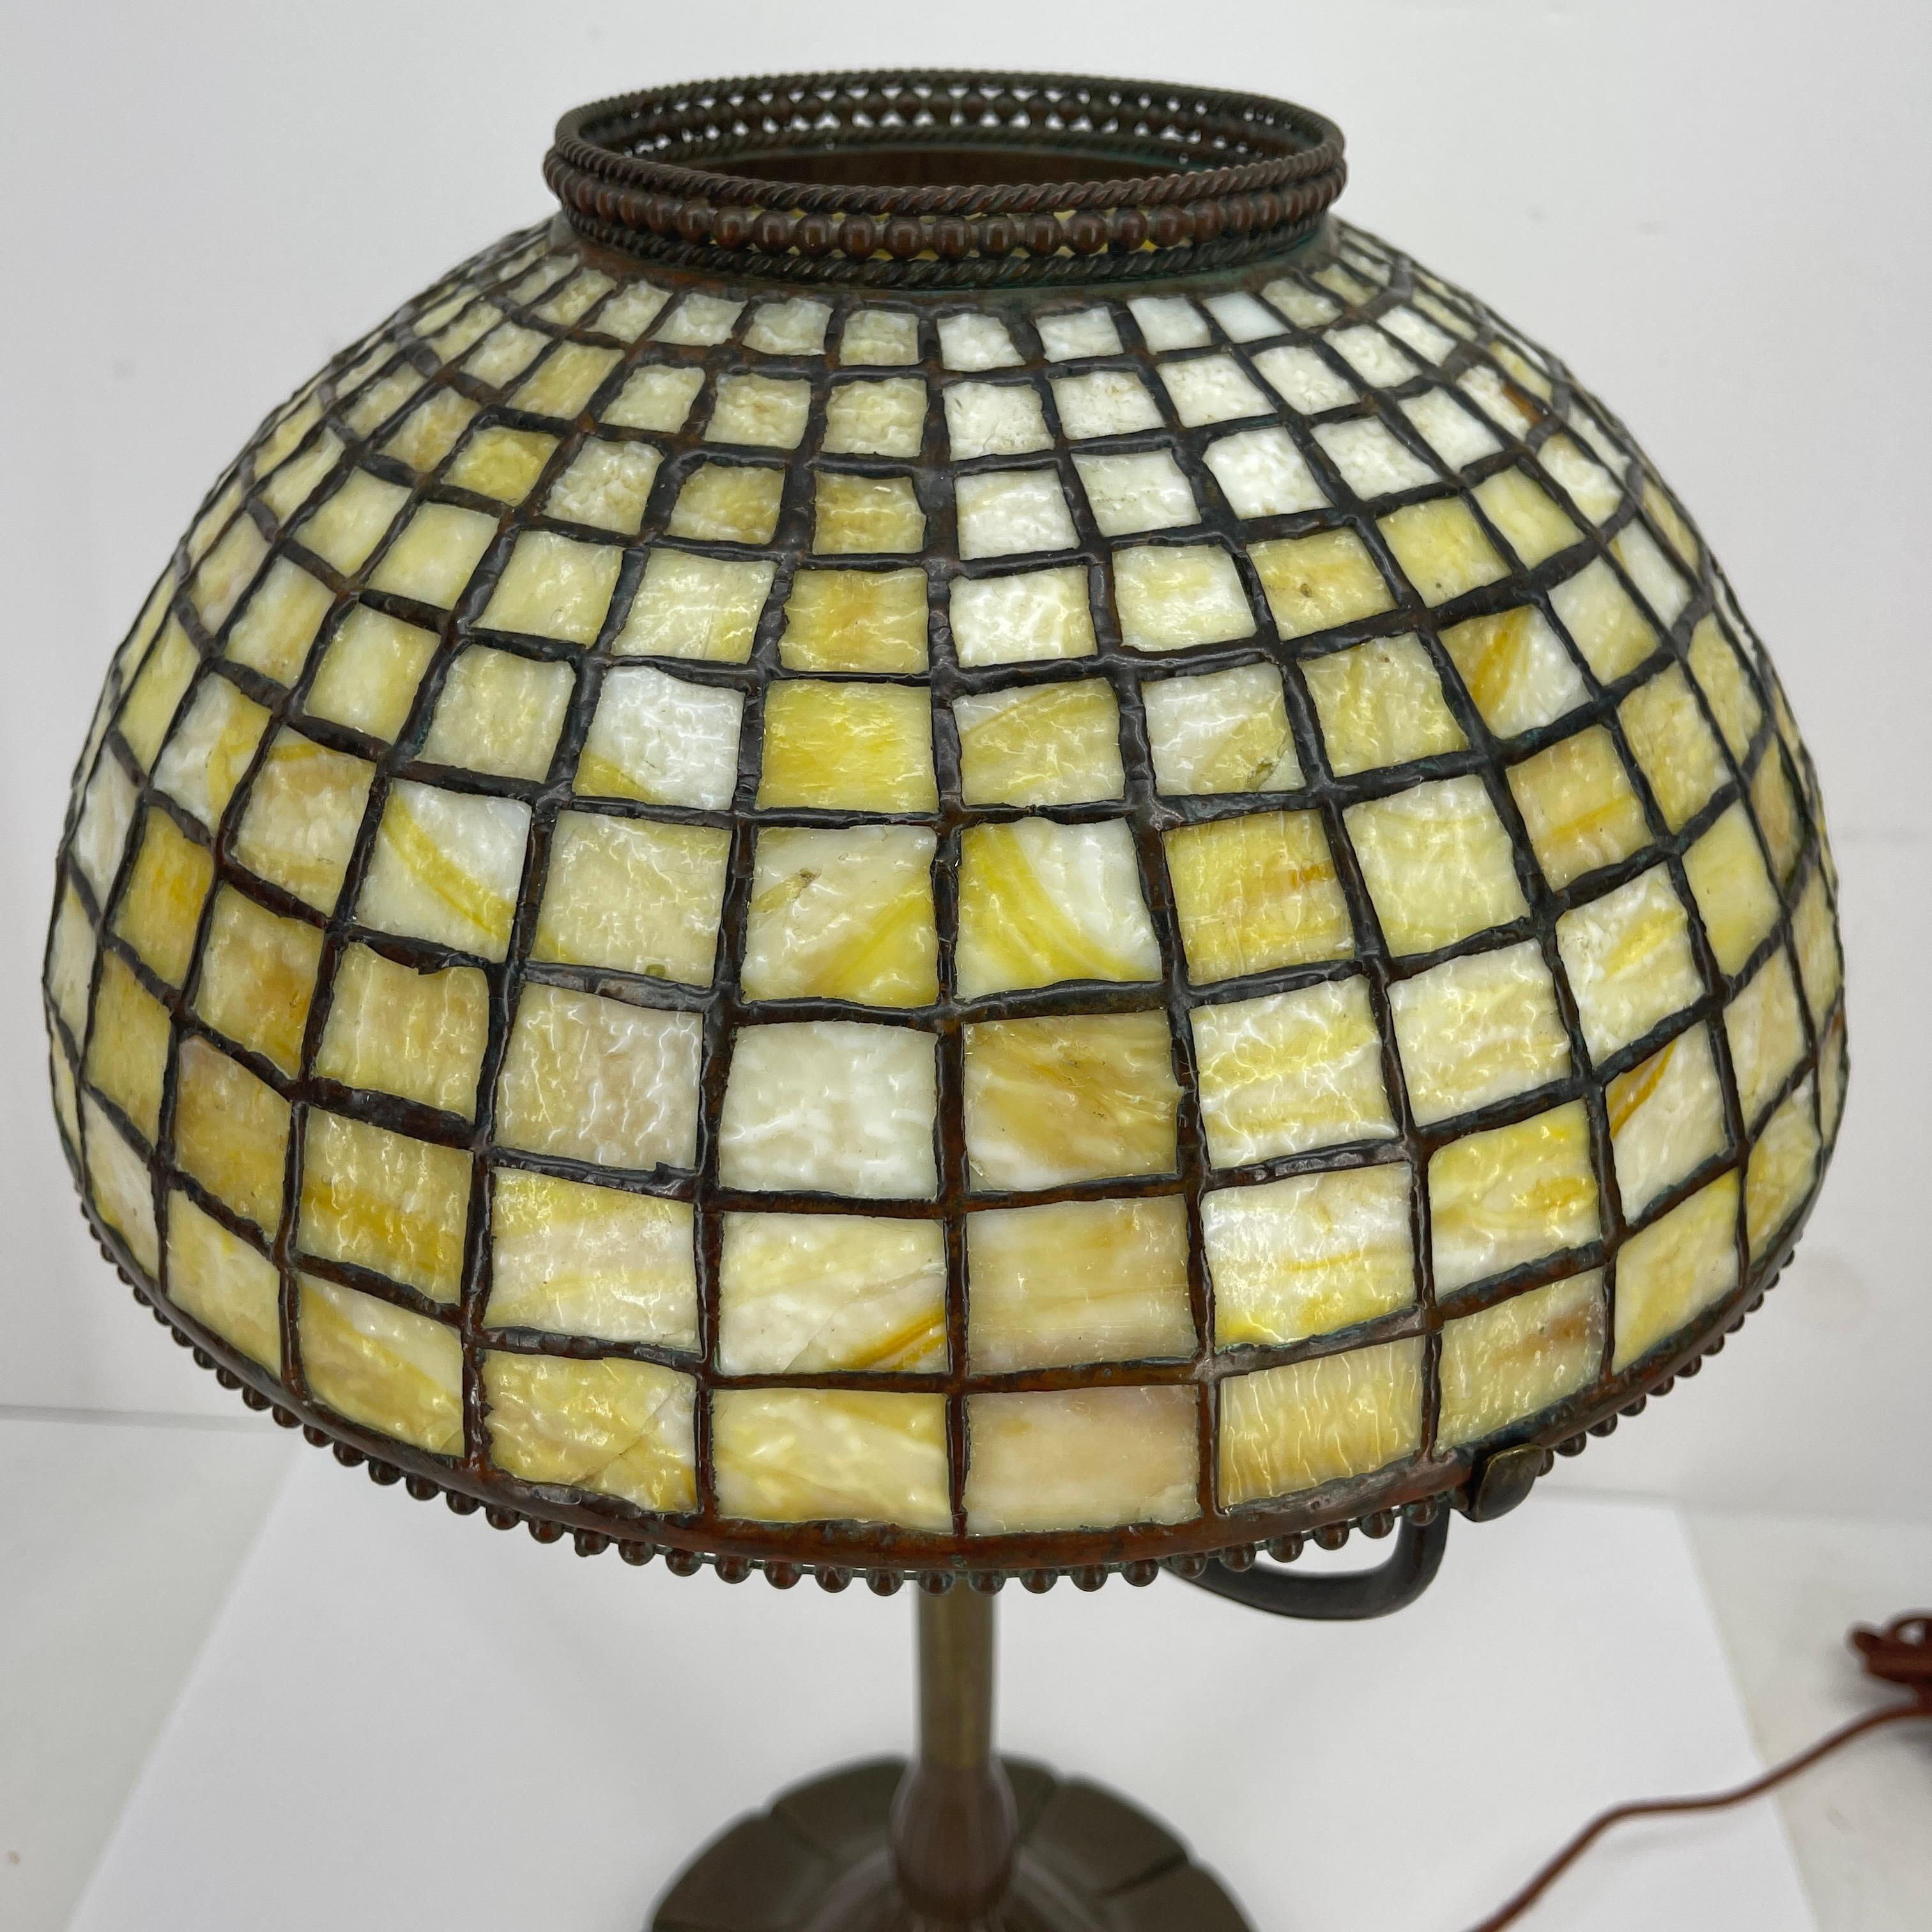 American Signed Tiffany Studios Art Nouveau Table Lamp, Early 1900's For Sale